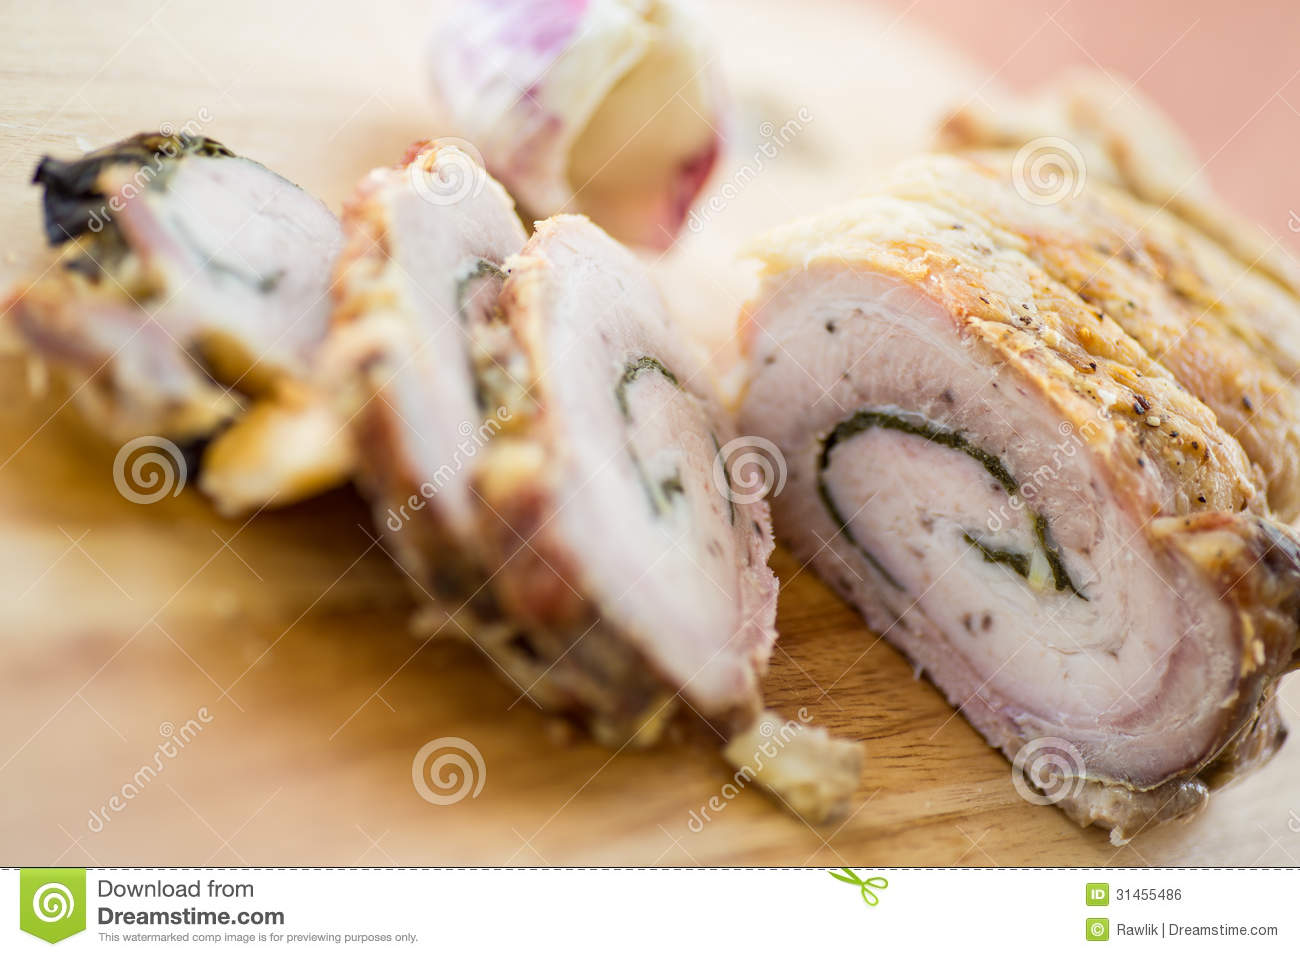 Meat Loaf Baked With Scallions Royalty Free Stock Image   Image